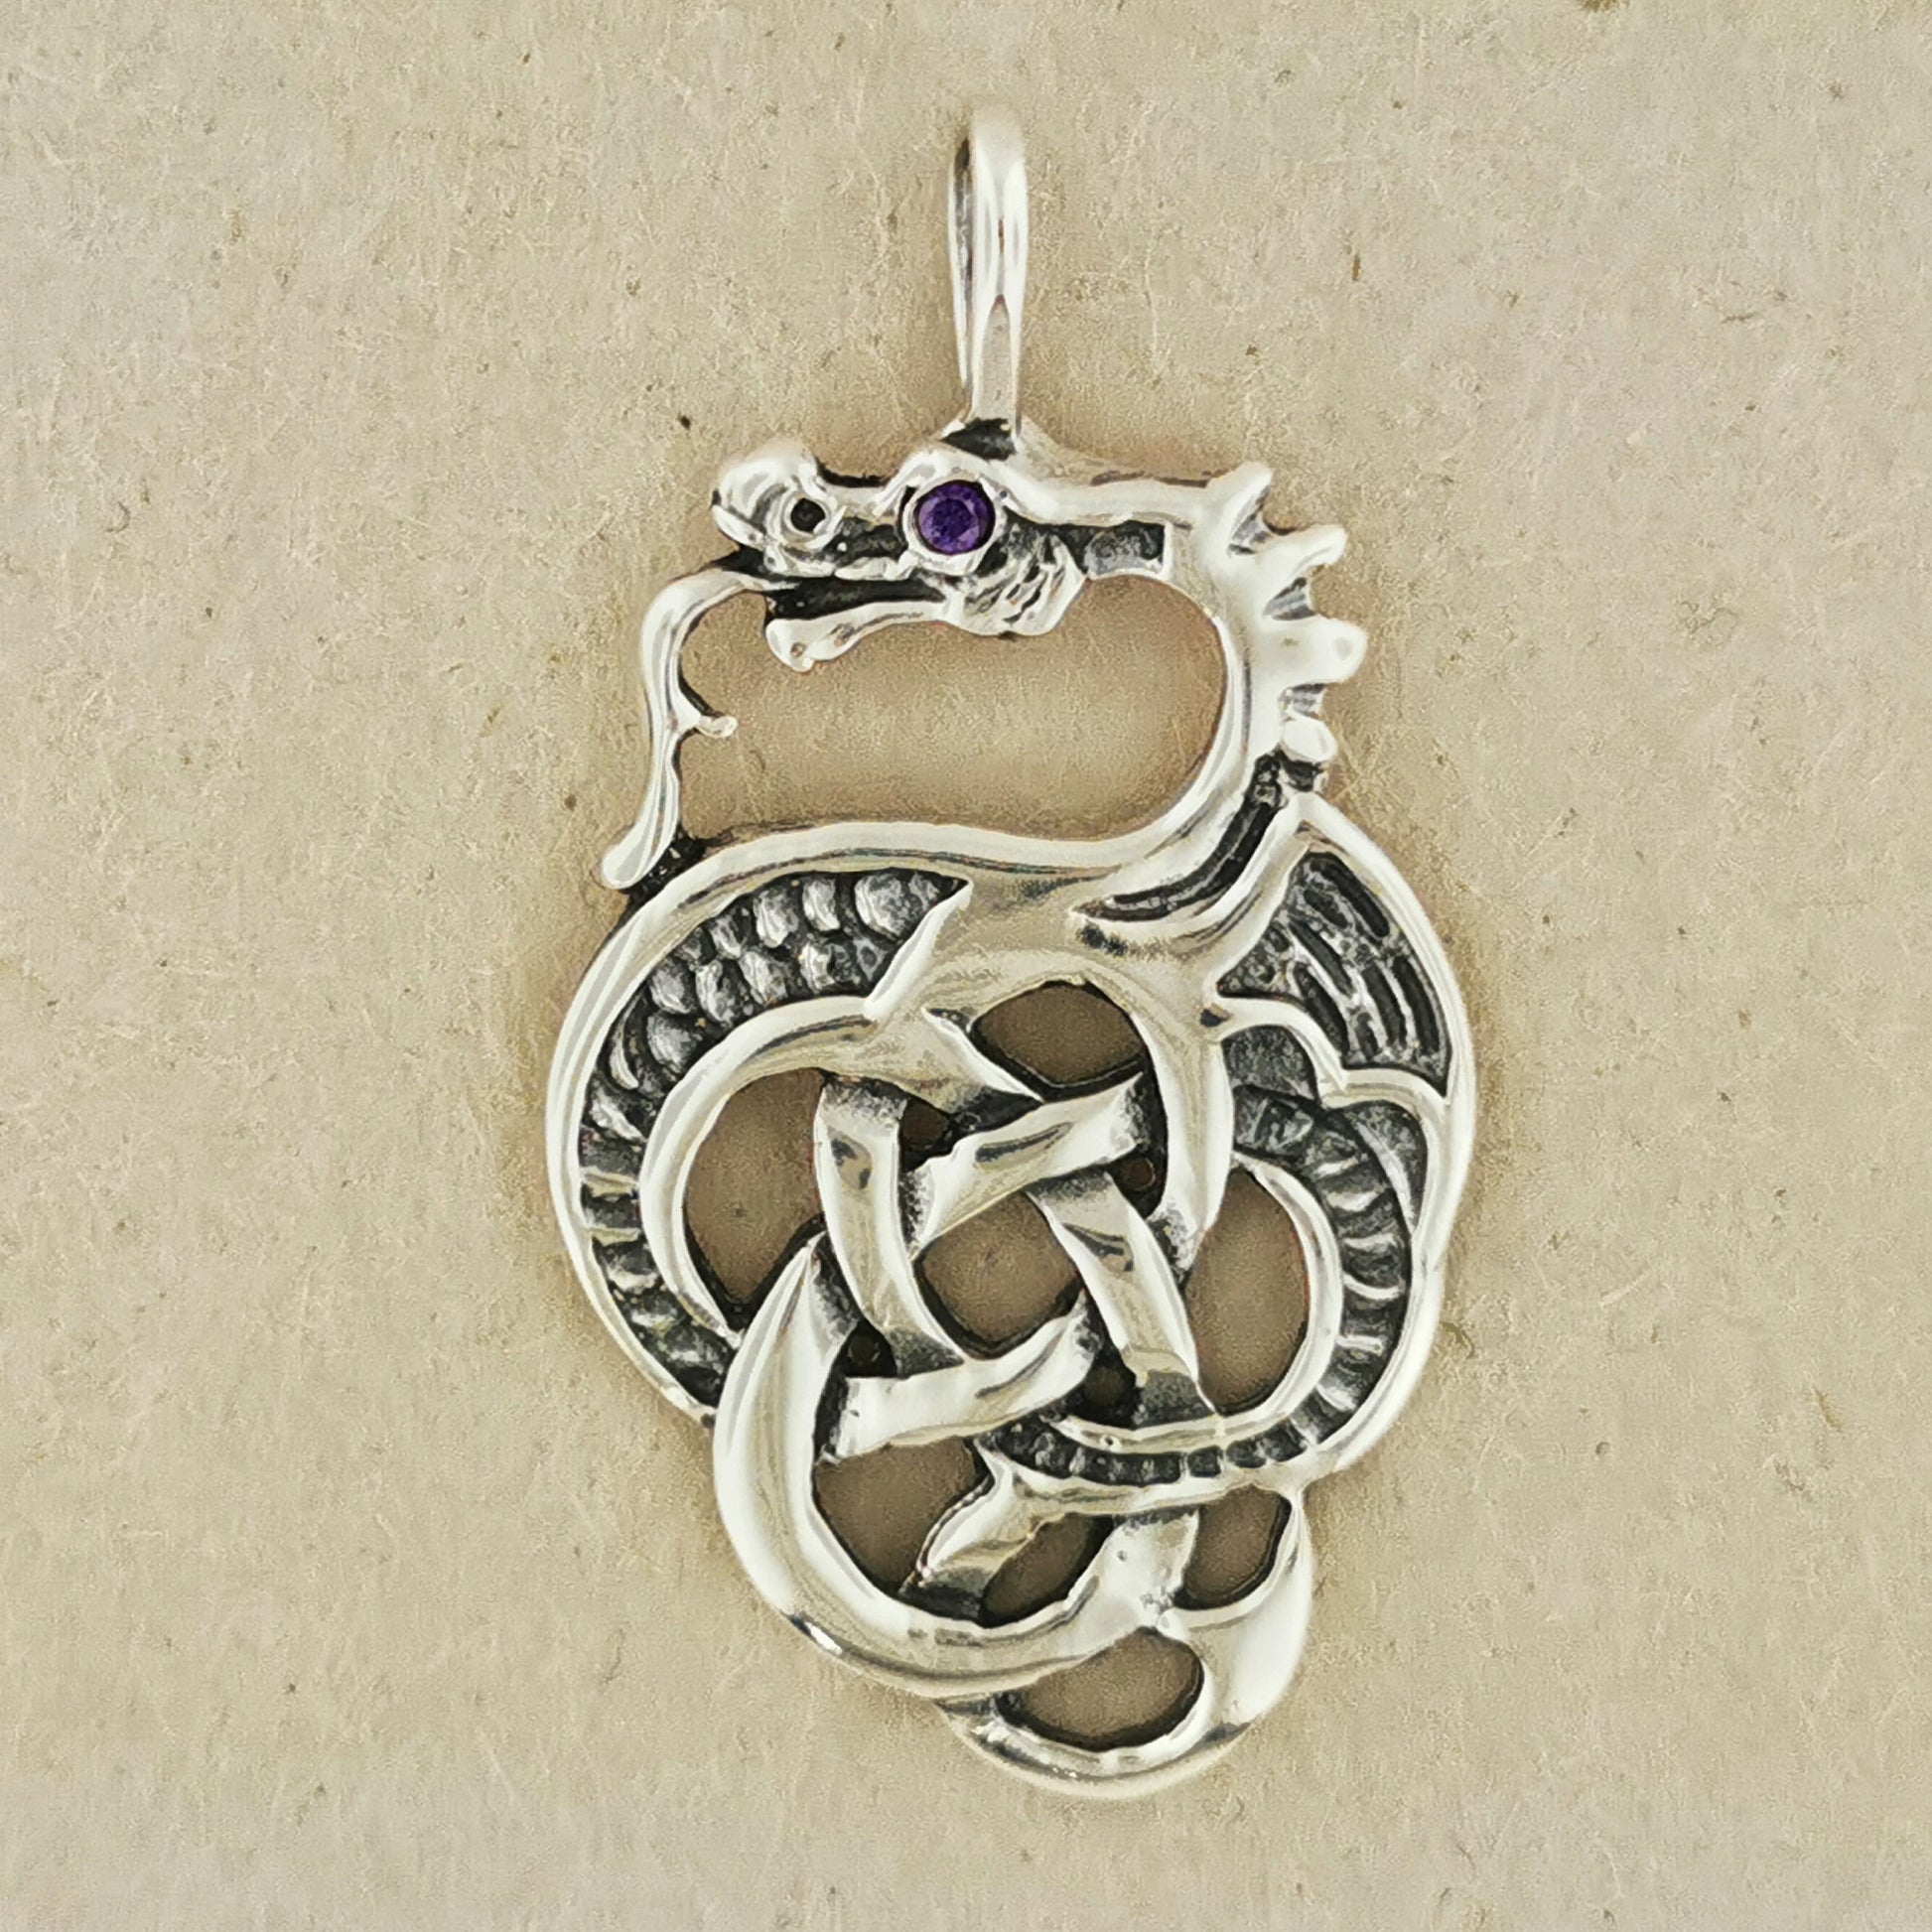 Celtic Dragon Pendant in Sterling Silver with Birthstone Eye, Birthstone Dragon Pendant Necklace, Birthstone Silver Pendant, Silver Dragon Pendant, Celtic Dragon Pendant, Silver Dragon Jewelry, Silver Birthstone Pendant, Sterling Silver Dragon